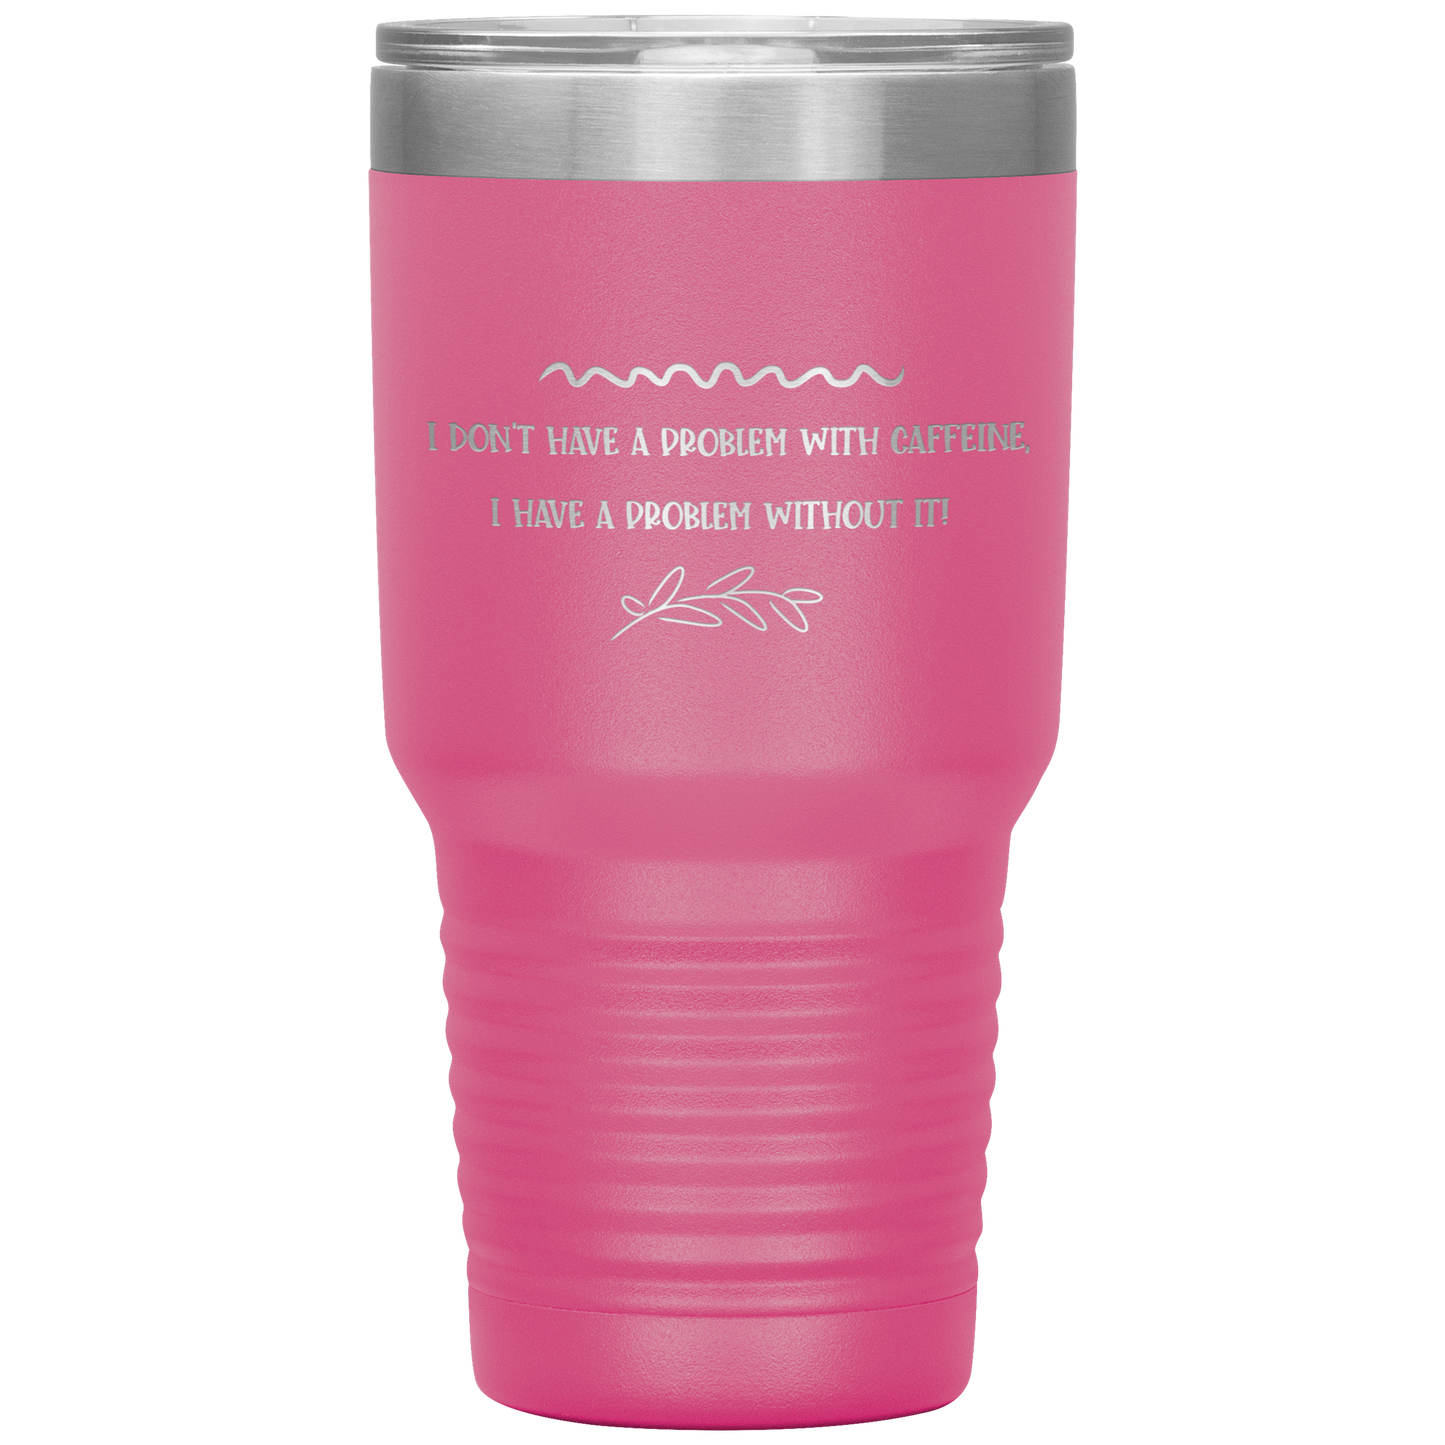 "I Don't Have a Problem with Caffeine" 30 oz. Insulated Stainless Steel Insulated Travel Coffee Cup with Lid